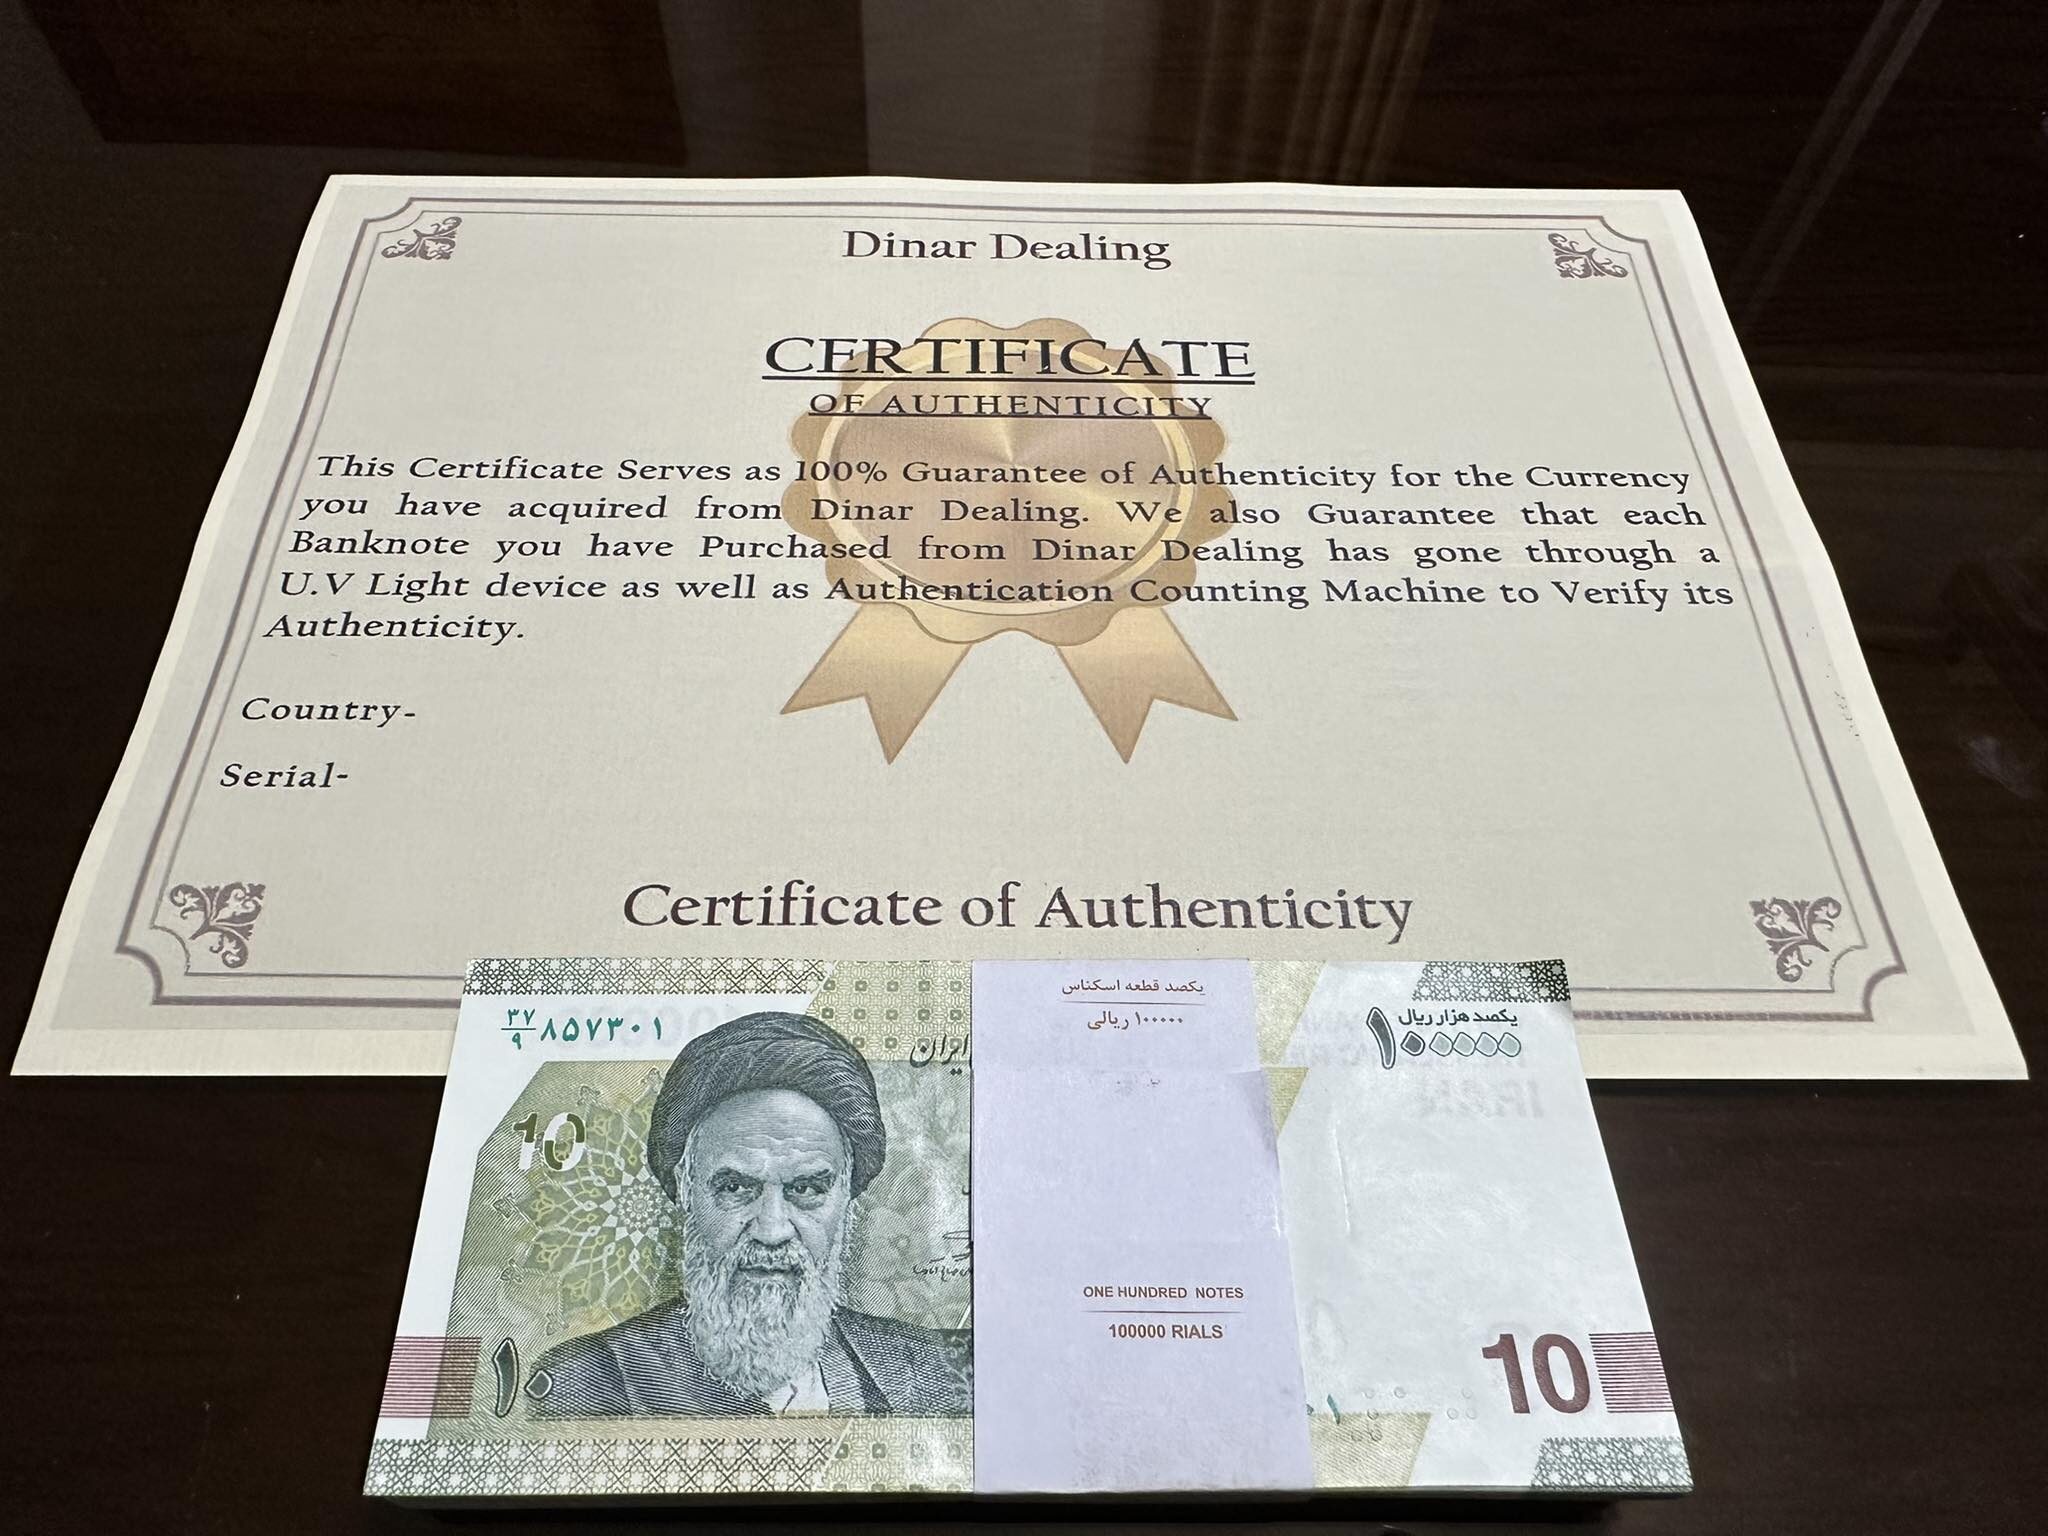 Buy 3 Bundles of 100,000 Rials and Get 40 Free Notes!